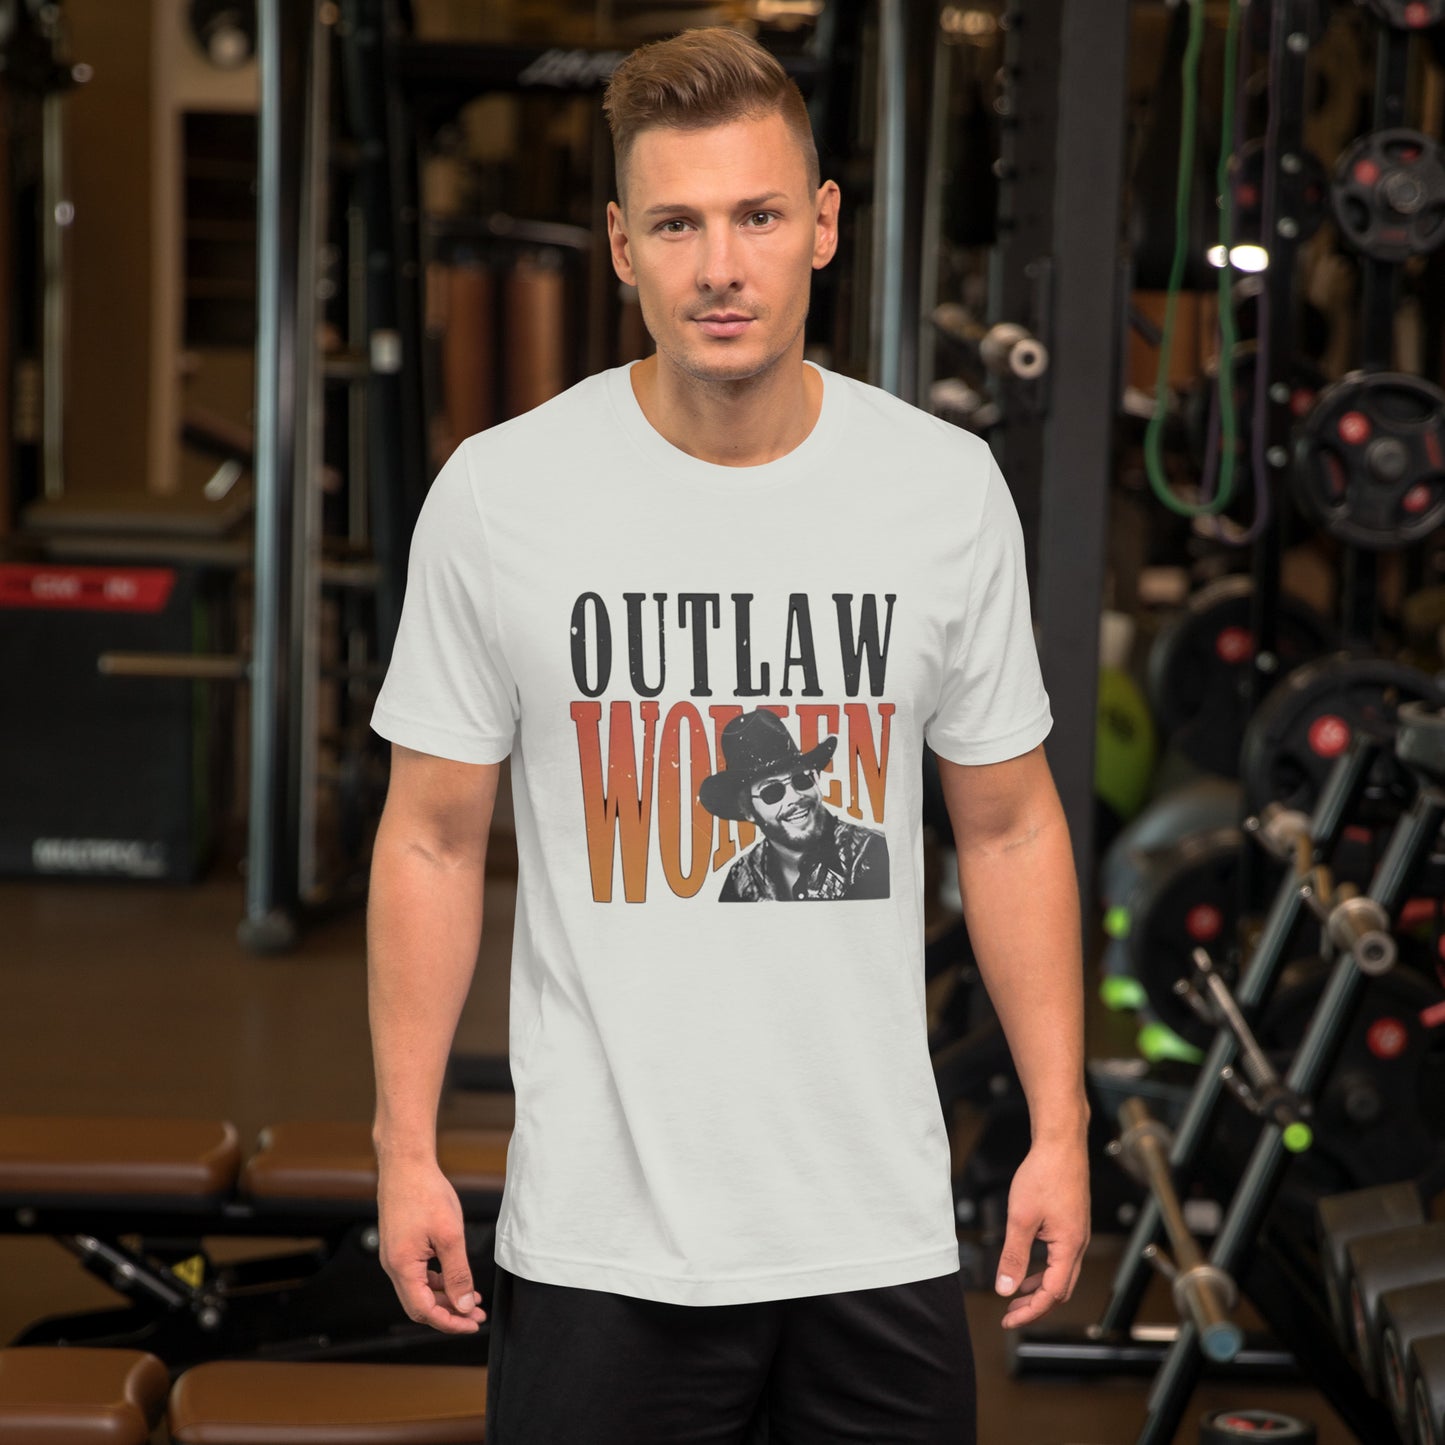 Outlaw - Classic Country Tees